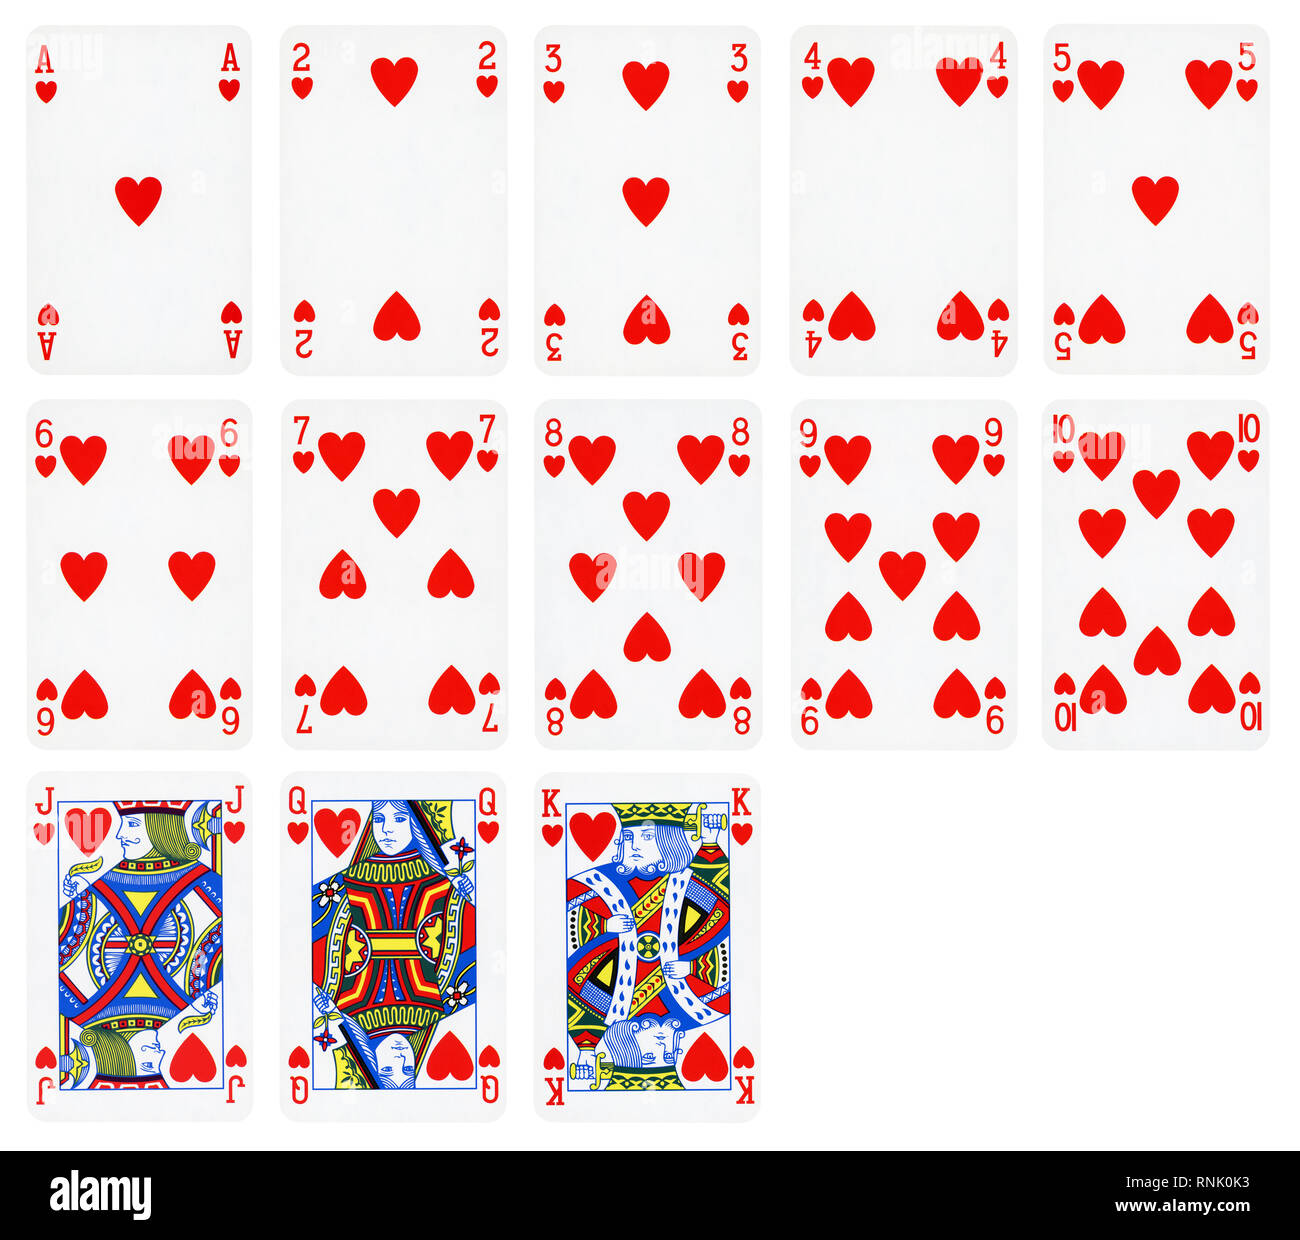 Playing cards of Hearts suit isolated on white background - High quality. Stock Photo